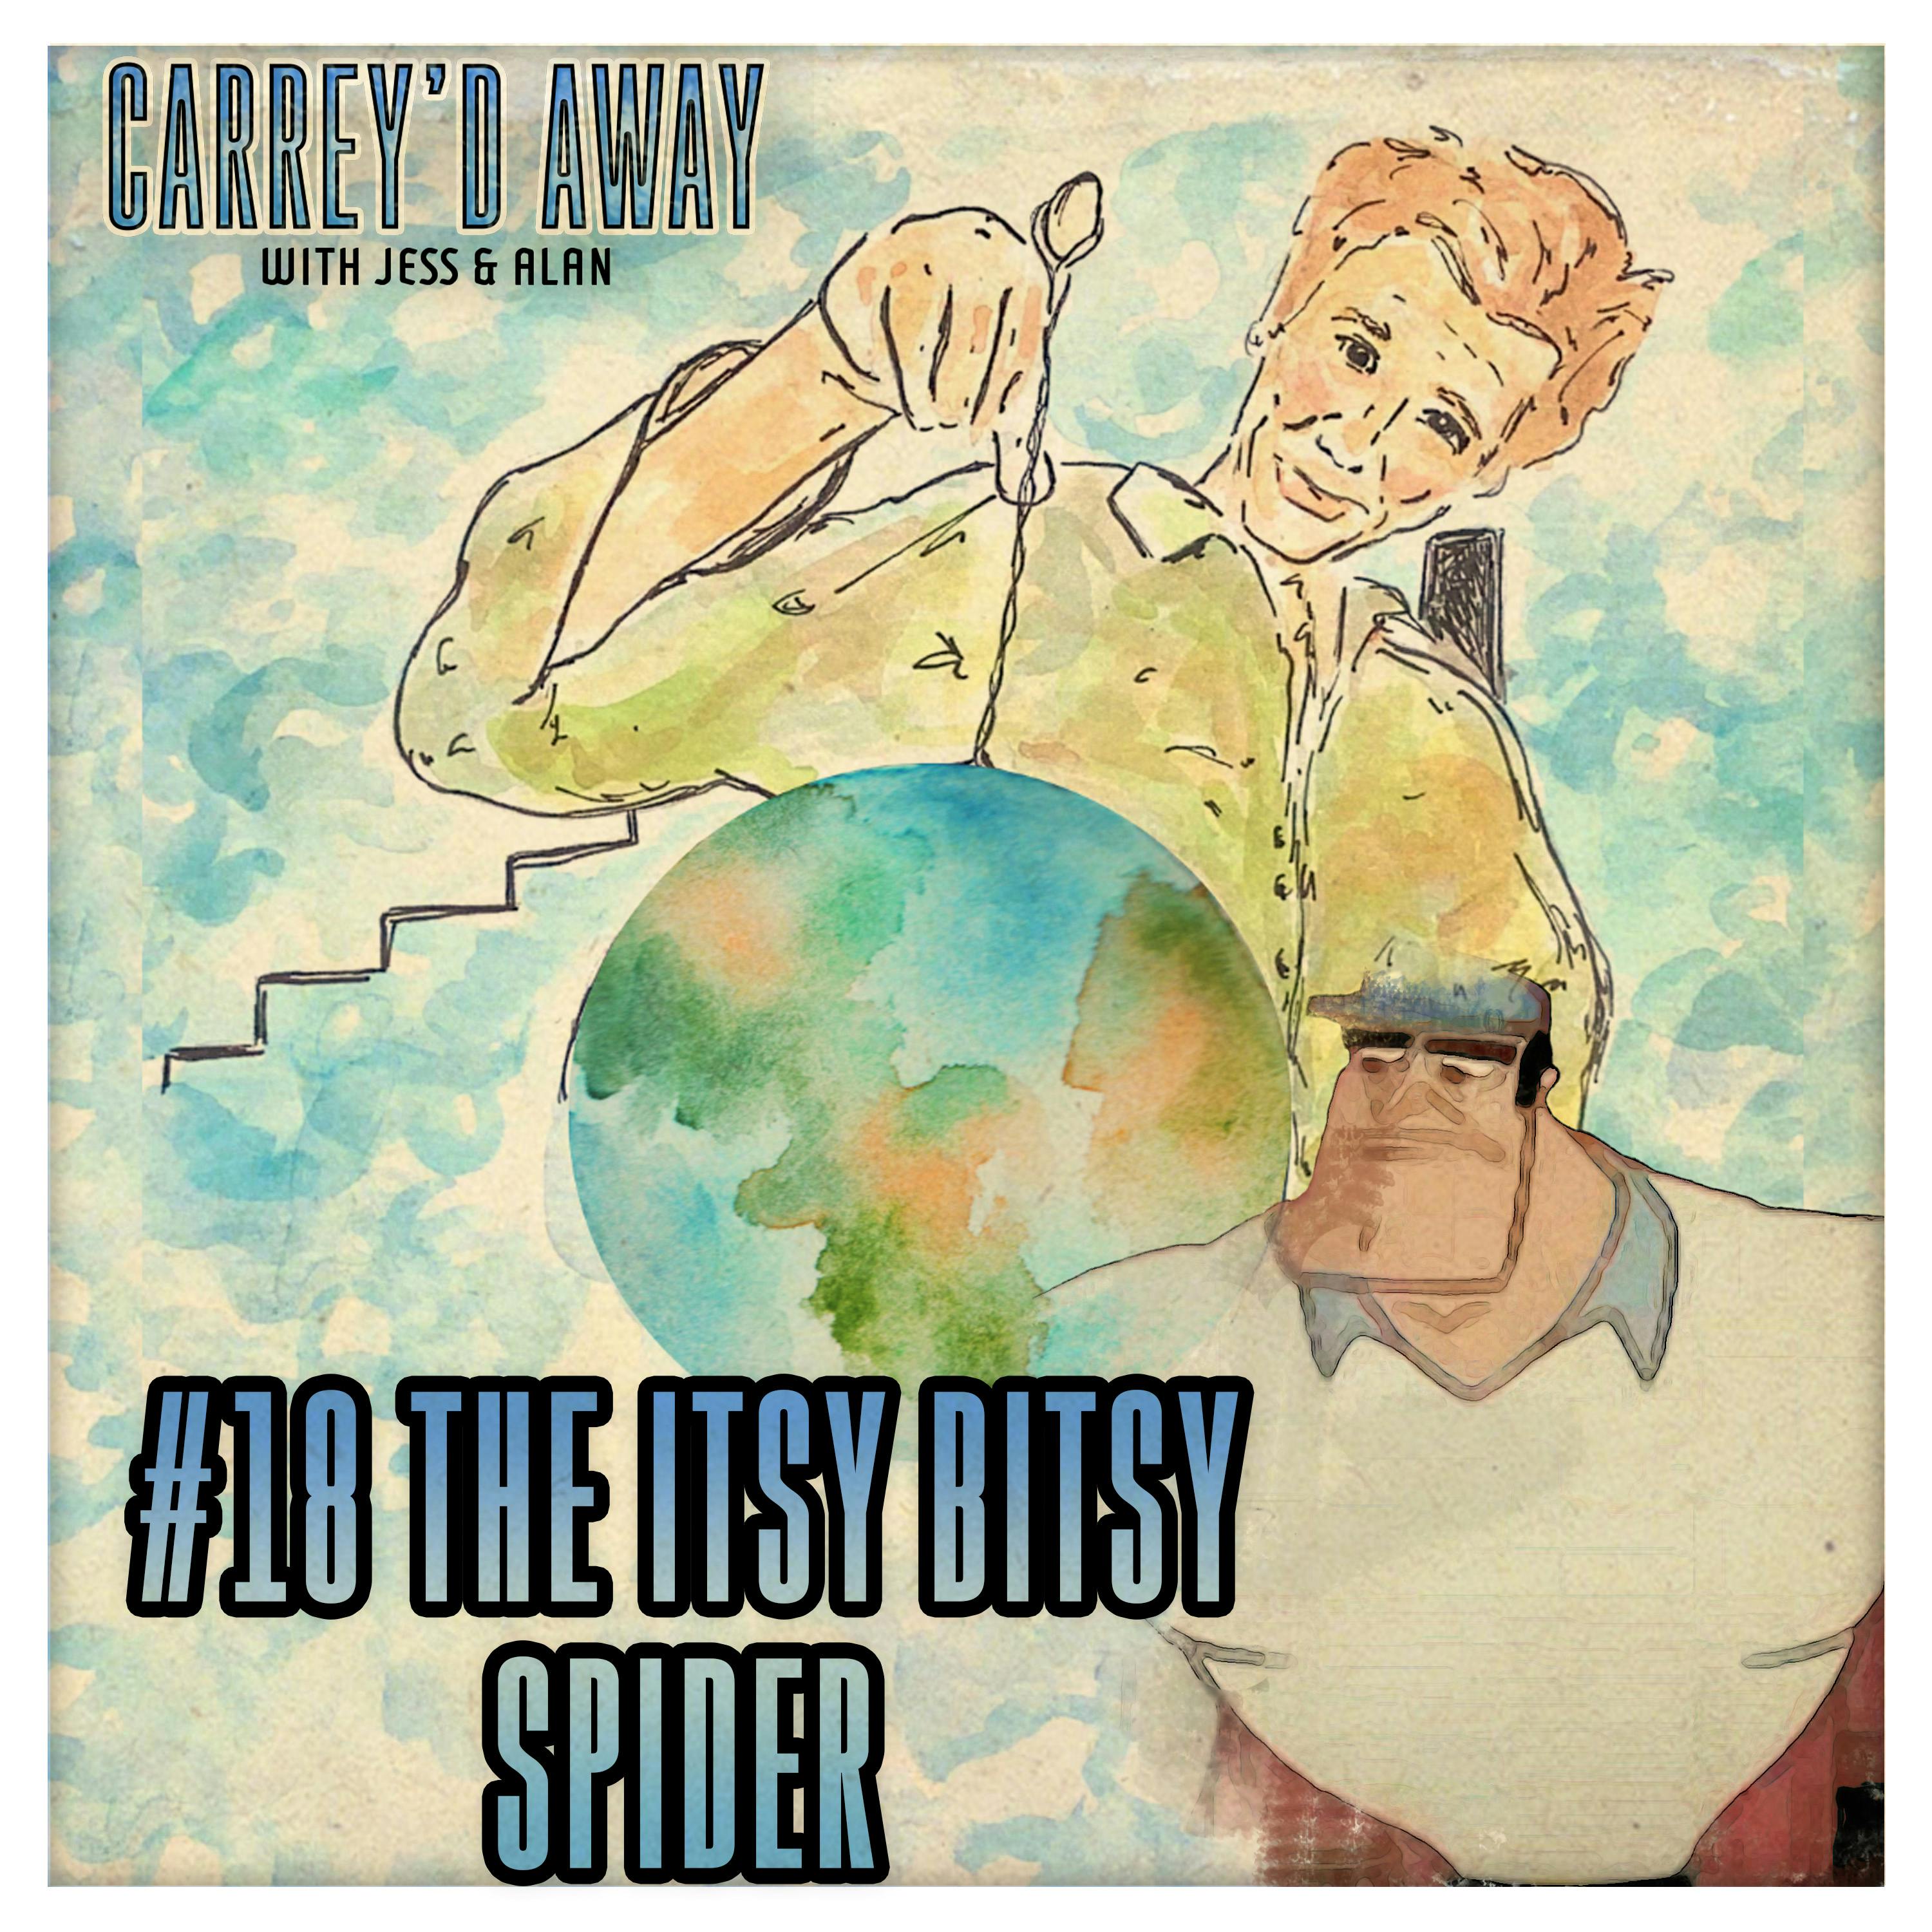 CARREY’D AWAY: Itsy Bitsy Spider (1992)